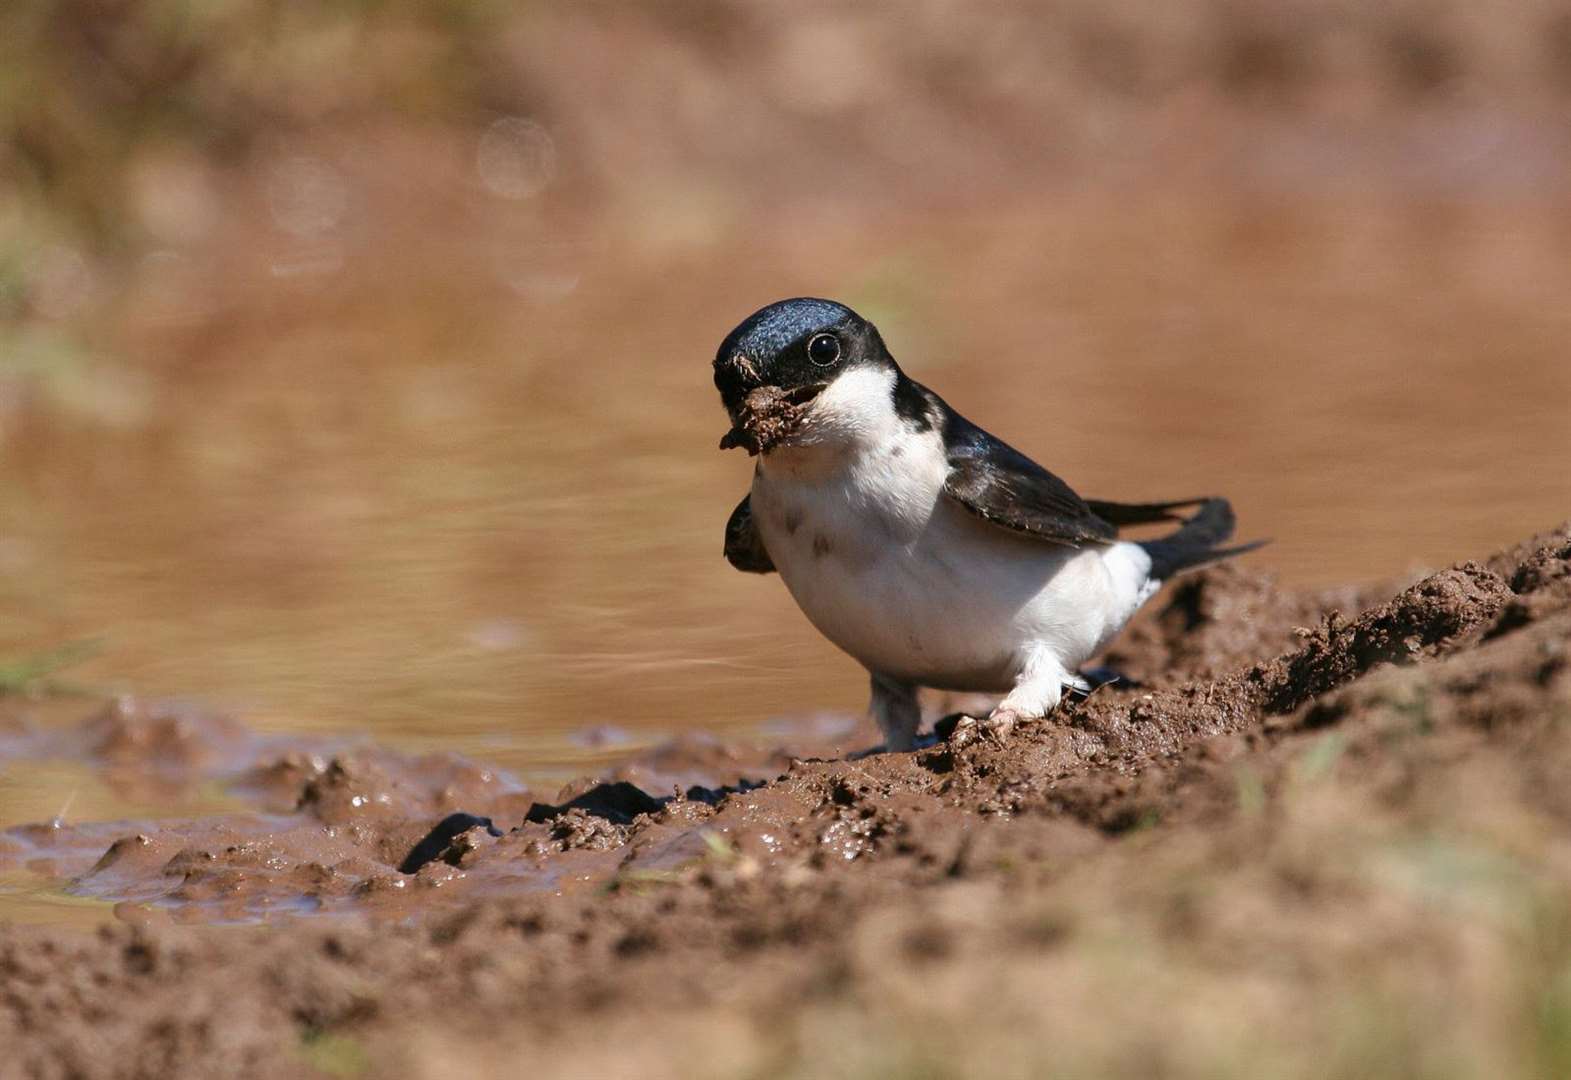 Put out a mud pie to save the birds as temperatures rise